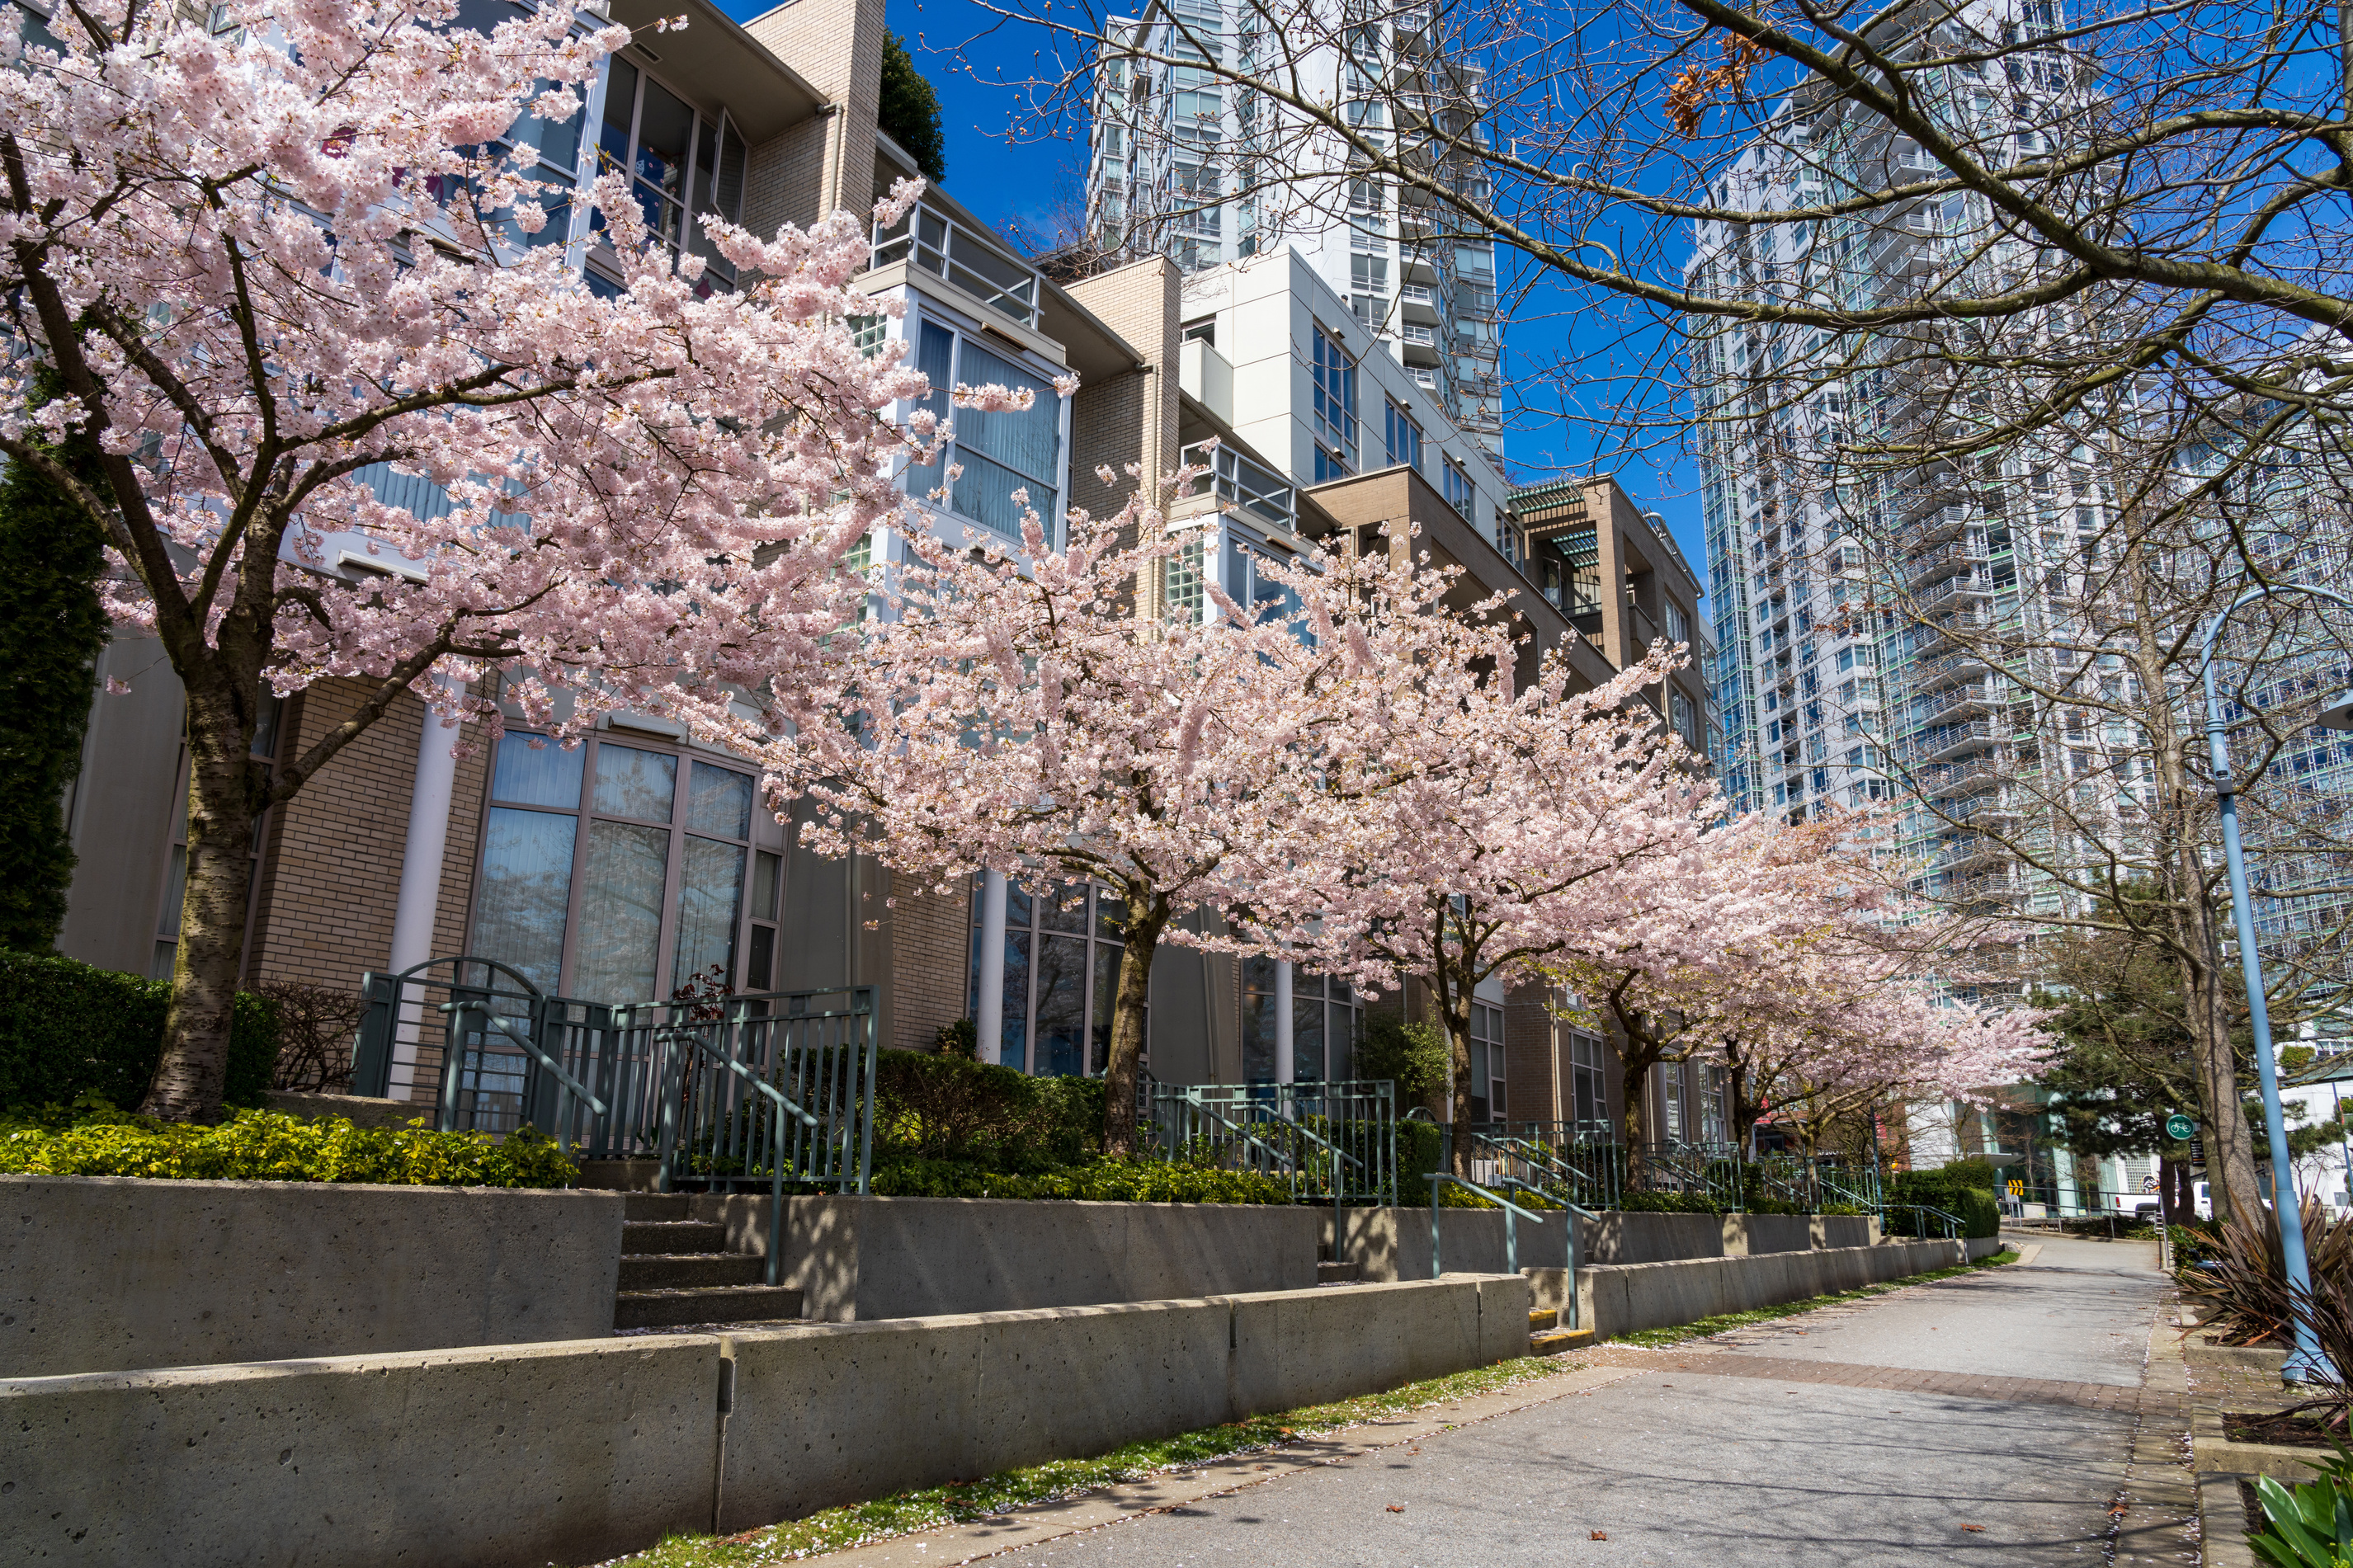 Blooming Cherry Blossoms in CIty